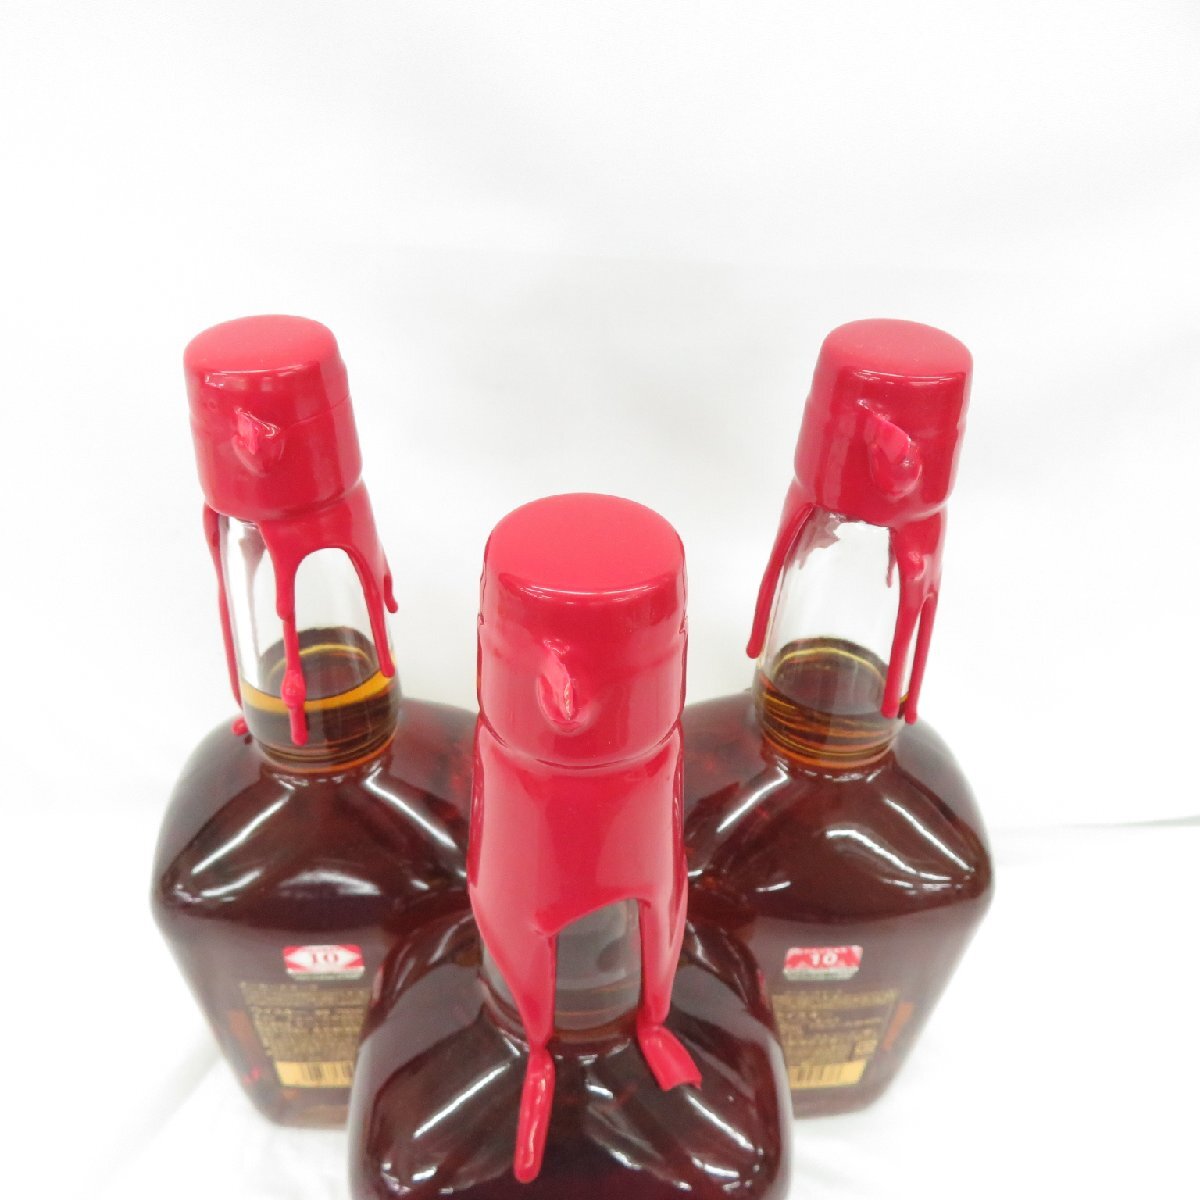 1 jpy ~ [ not yet . plug ] Manufacturers z Mark whisky 700ml 43% 3 pcs set set sale glass attaching * including in a package un- possible 11578530 0520